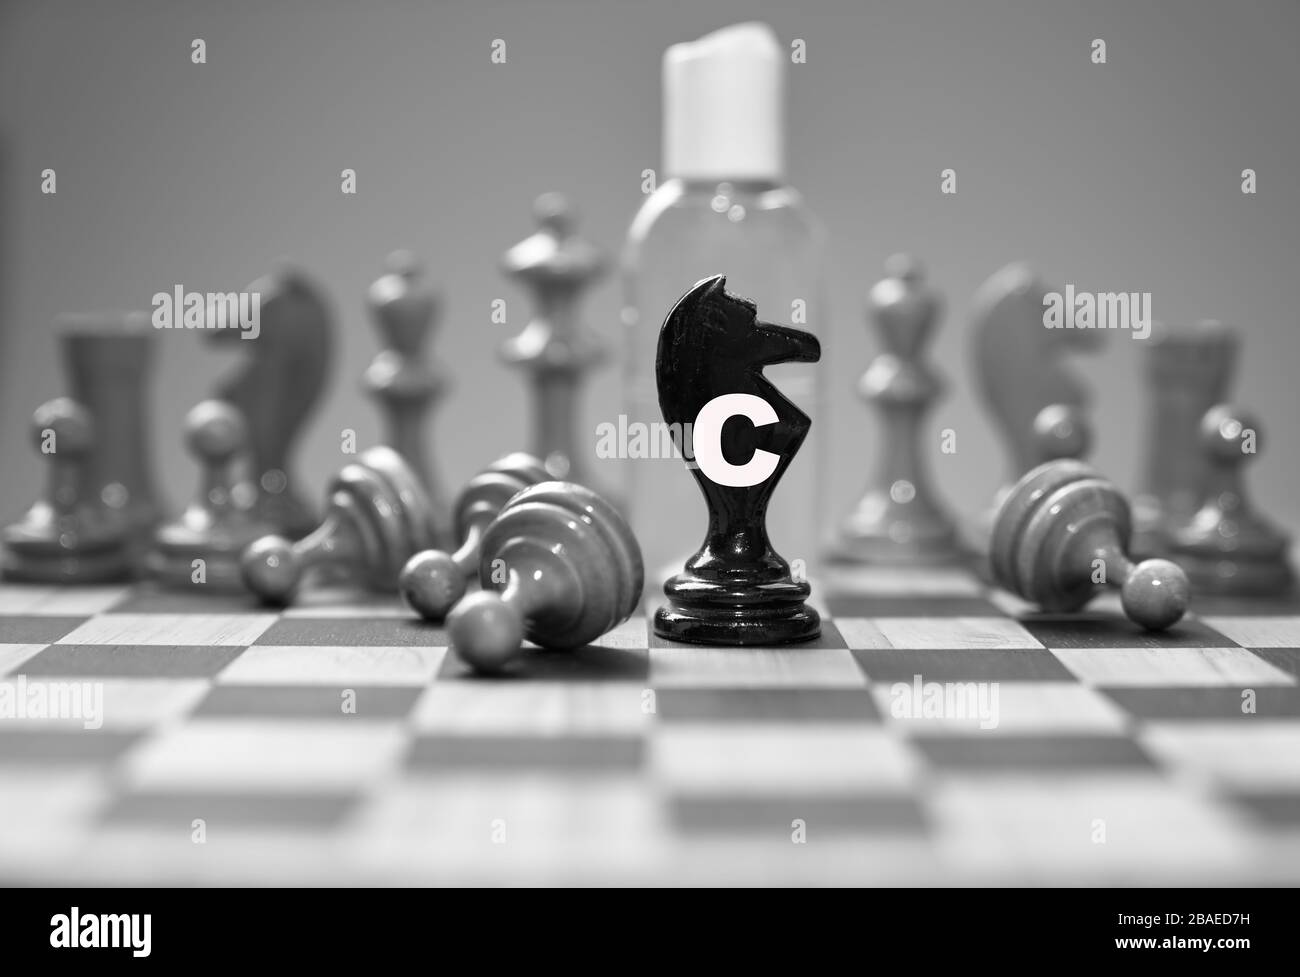 Coronavirus concept image chess pieces and hand sanitizer on chessboard illustrating global struggle against novel covid-19 outbreak. Stock Photo